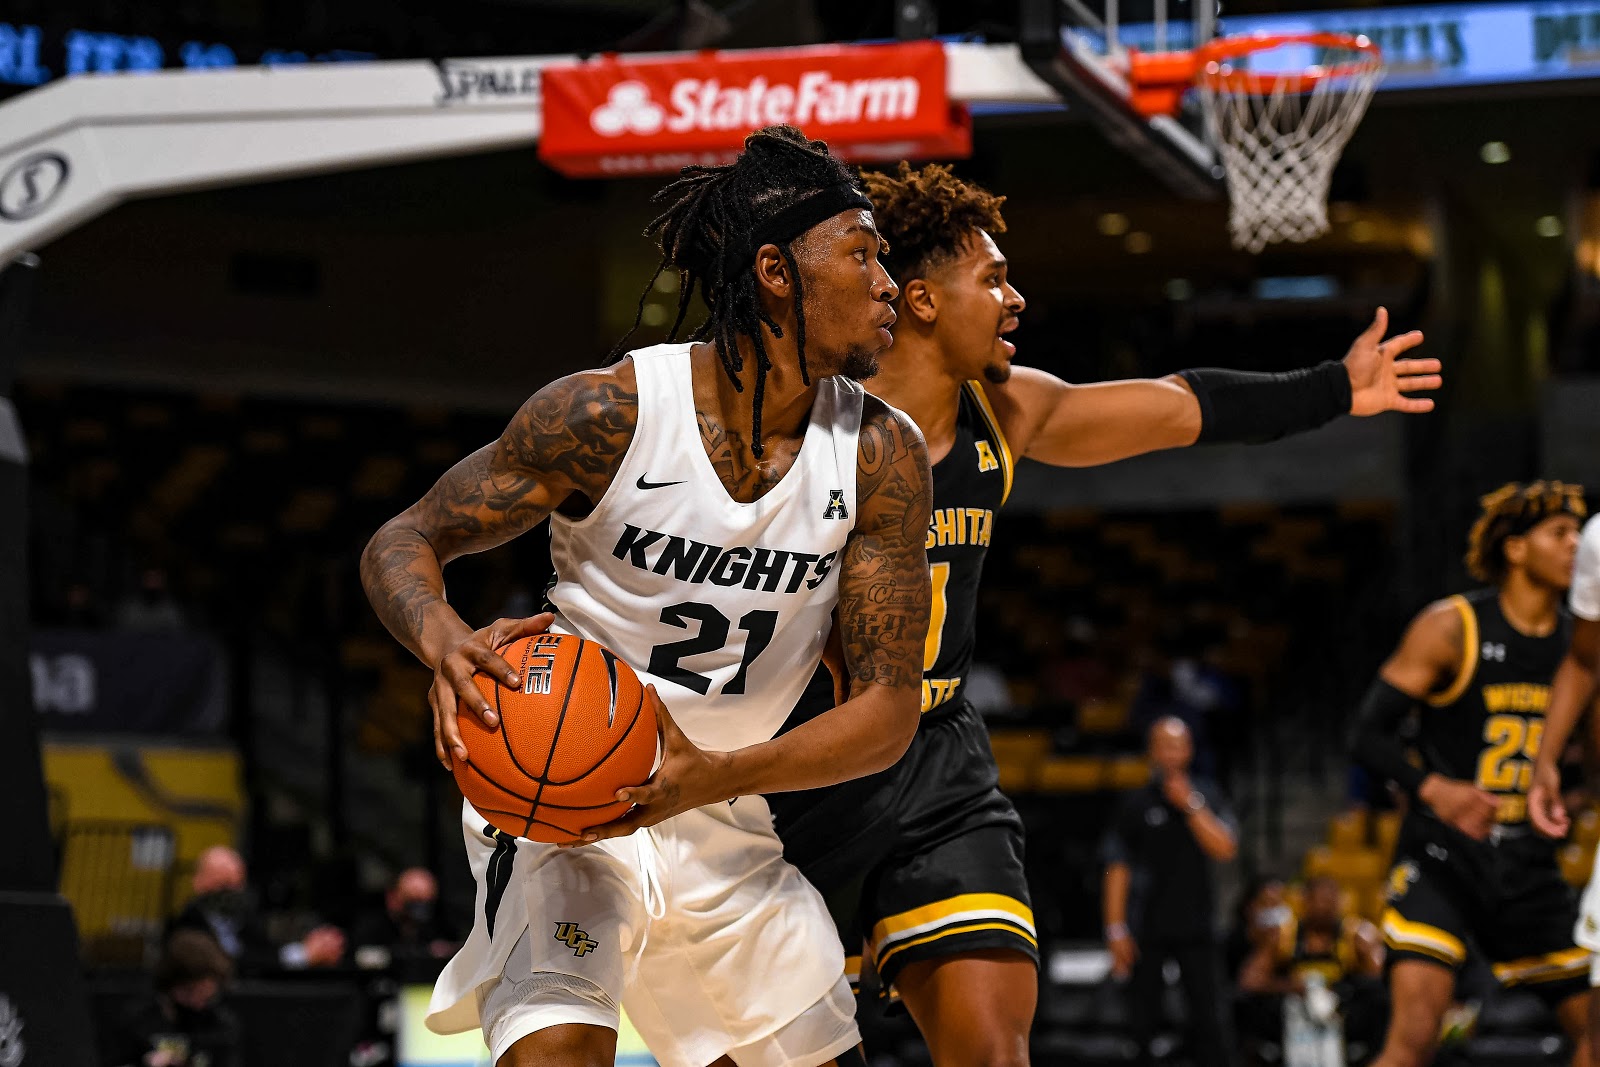 UCF sophomore forward C.J. Walker (21) was responsible for 7 points in the Knights’ 61-60 loss to the Wichita State Shockers at Addition Financial Arena on Wednesday. Photo Courtesy of UCF Athletics. 